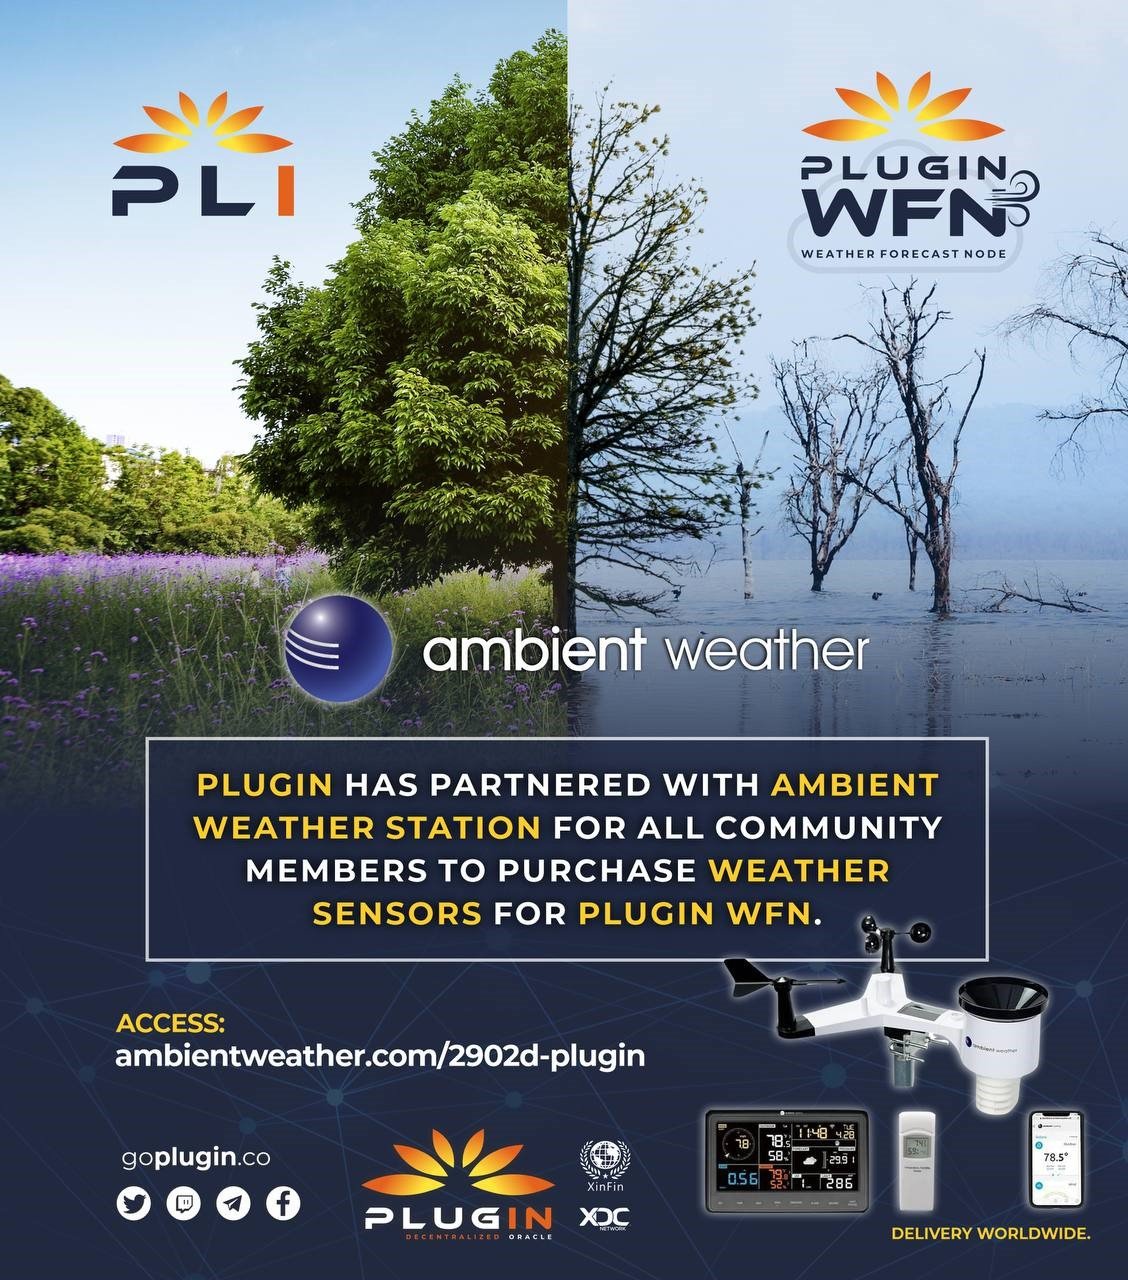 Plugin & Ambient Weather Partnership Solution Now Available for Organizations